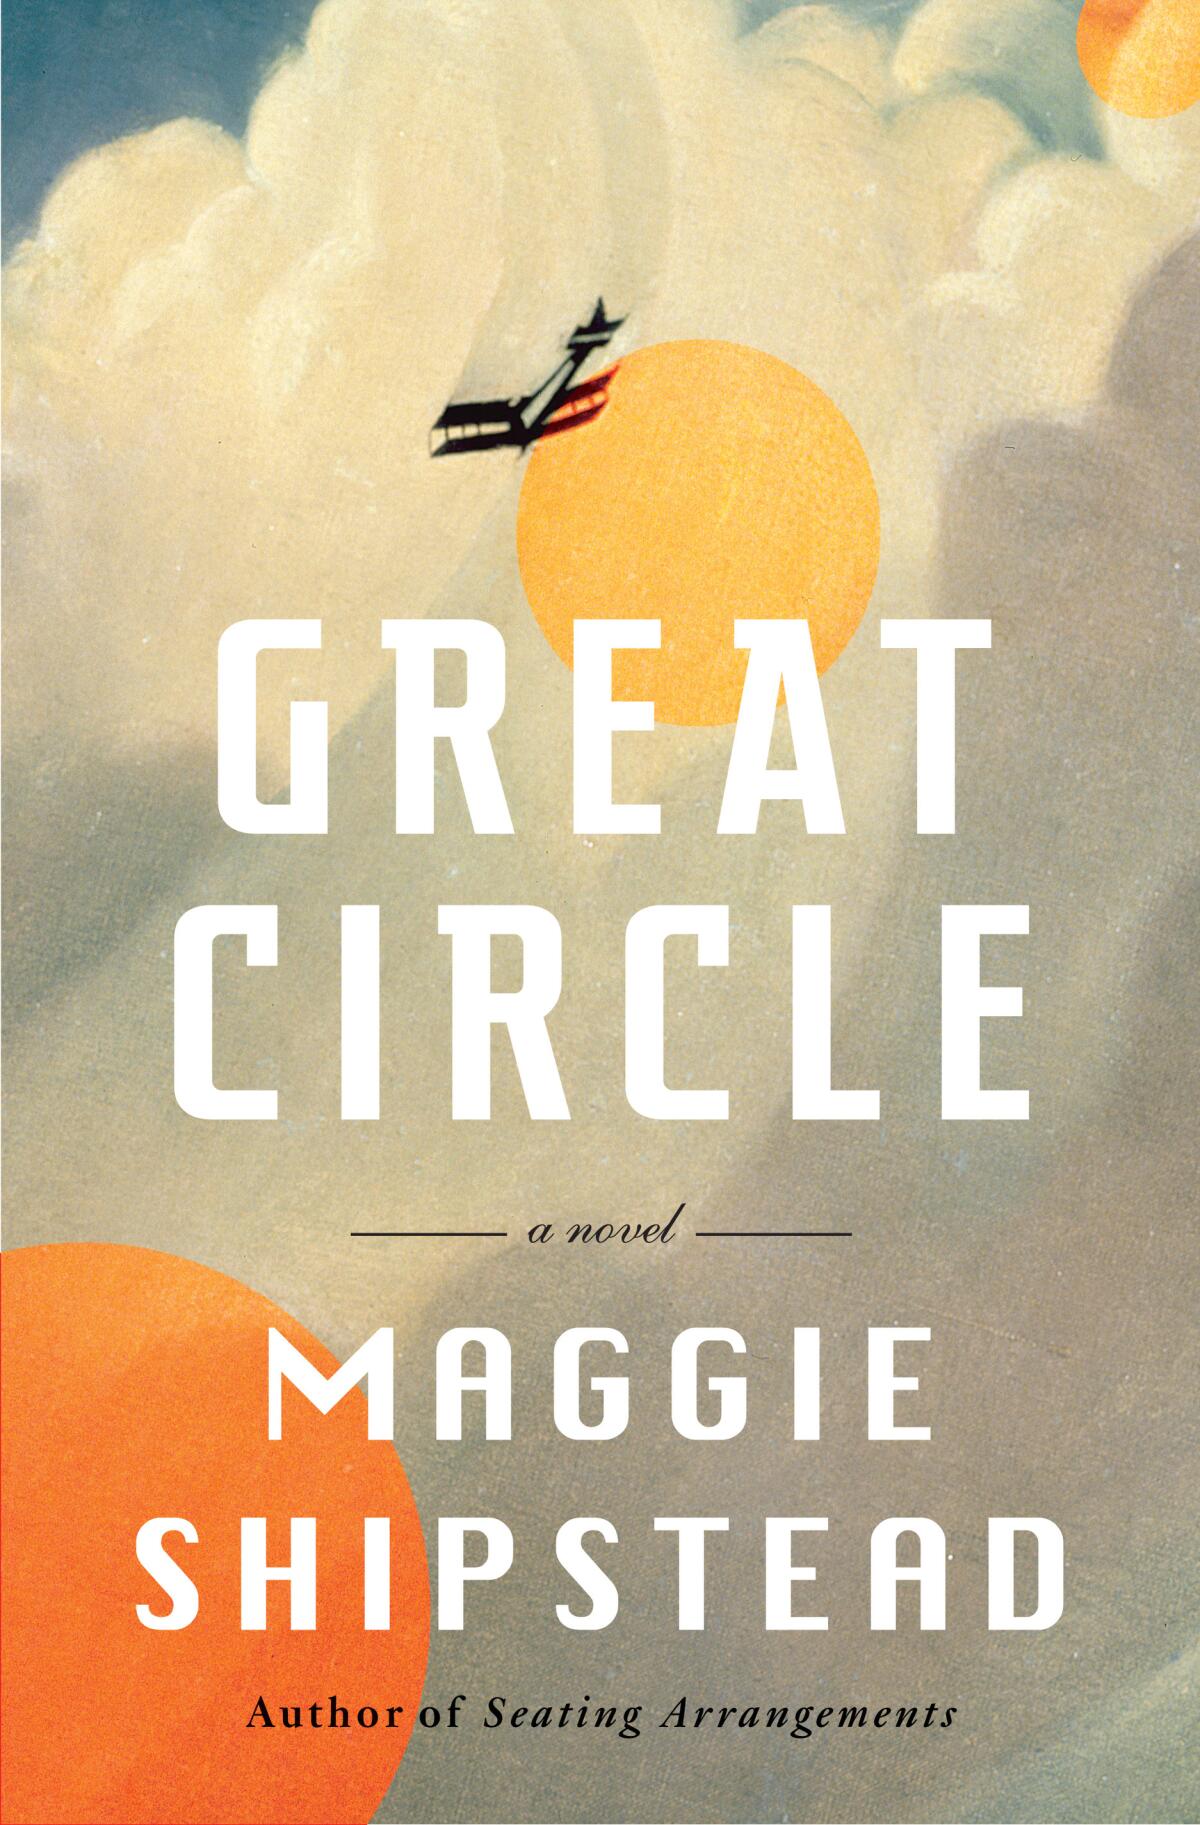 Book jacket for "Great Circle" by Maggie Shipstead.